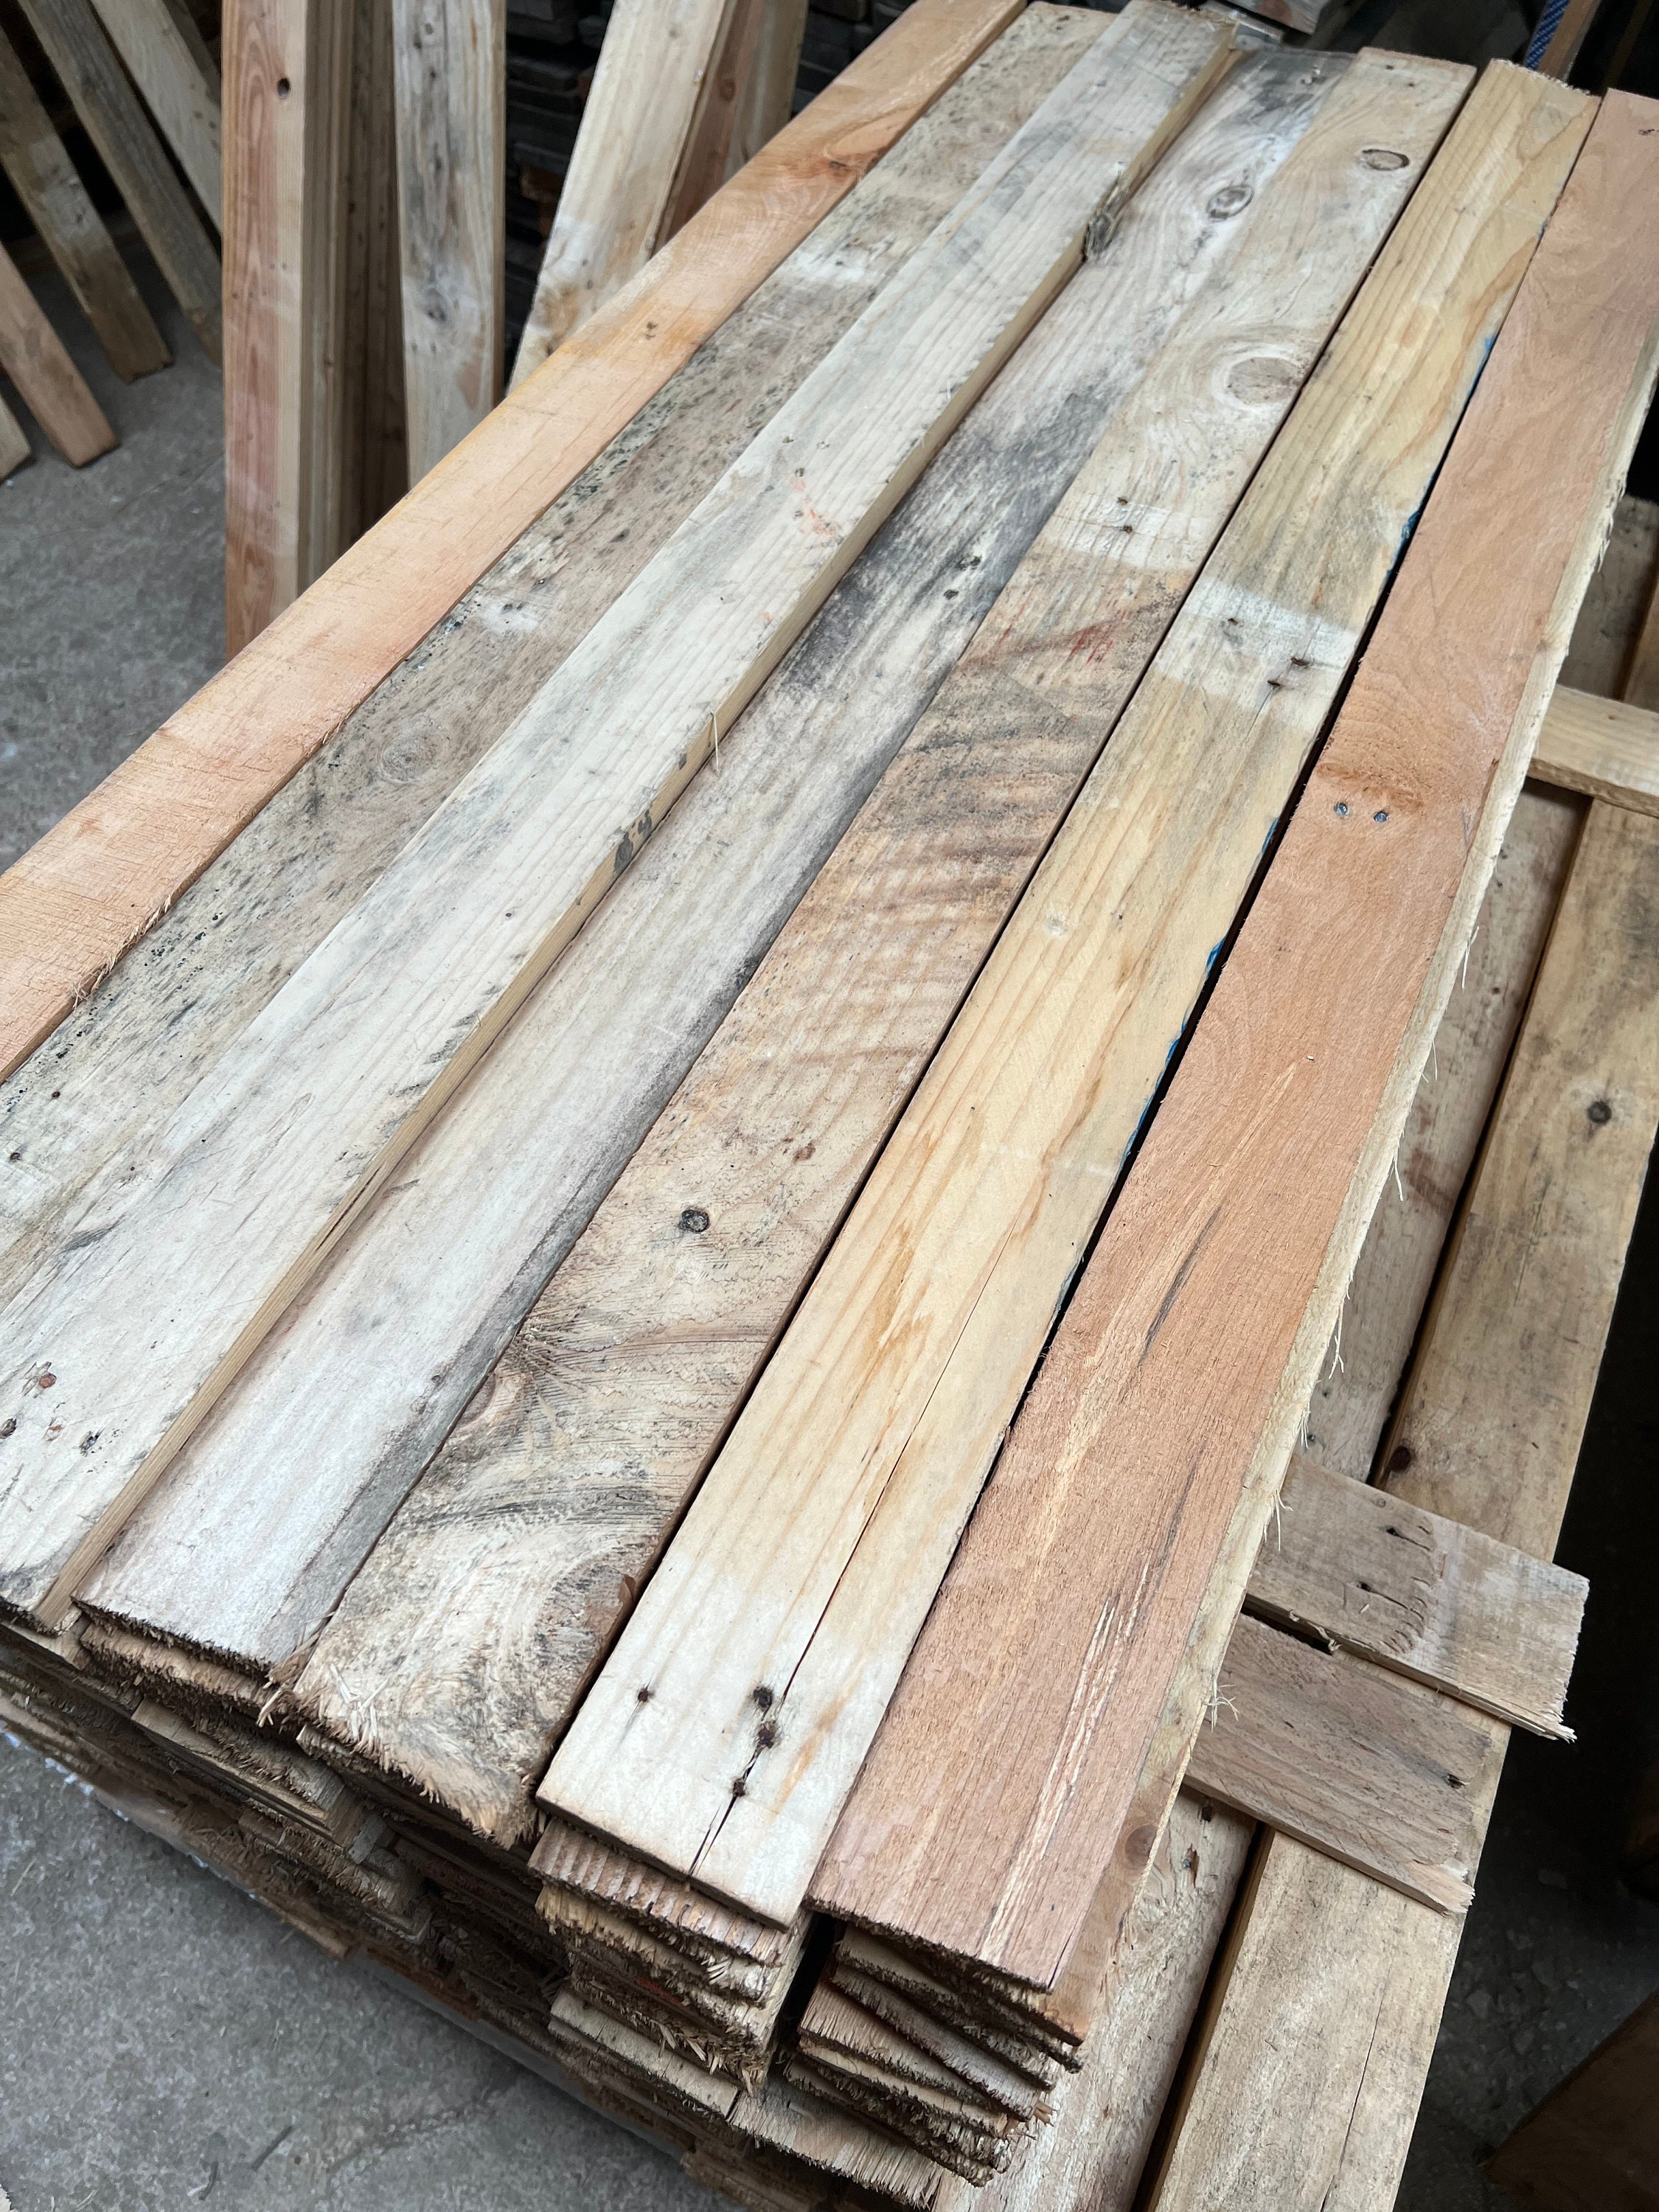 15 X 100cm Reclaimed Pallet Boards Timber Wall Cladding Project Read Description 